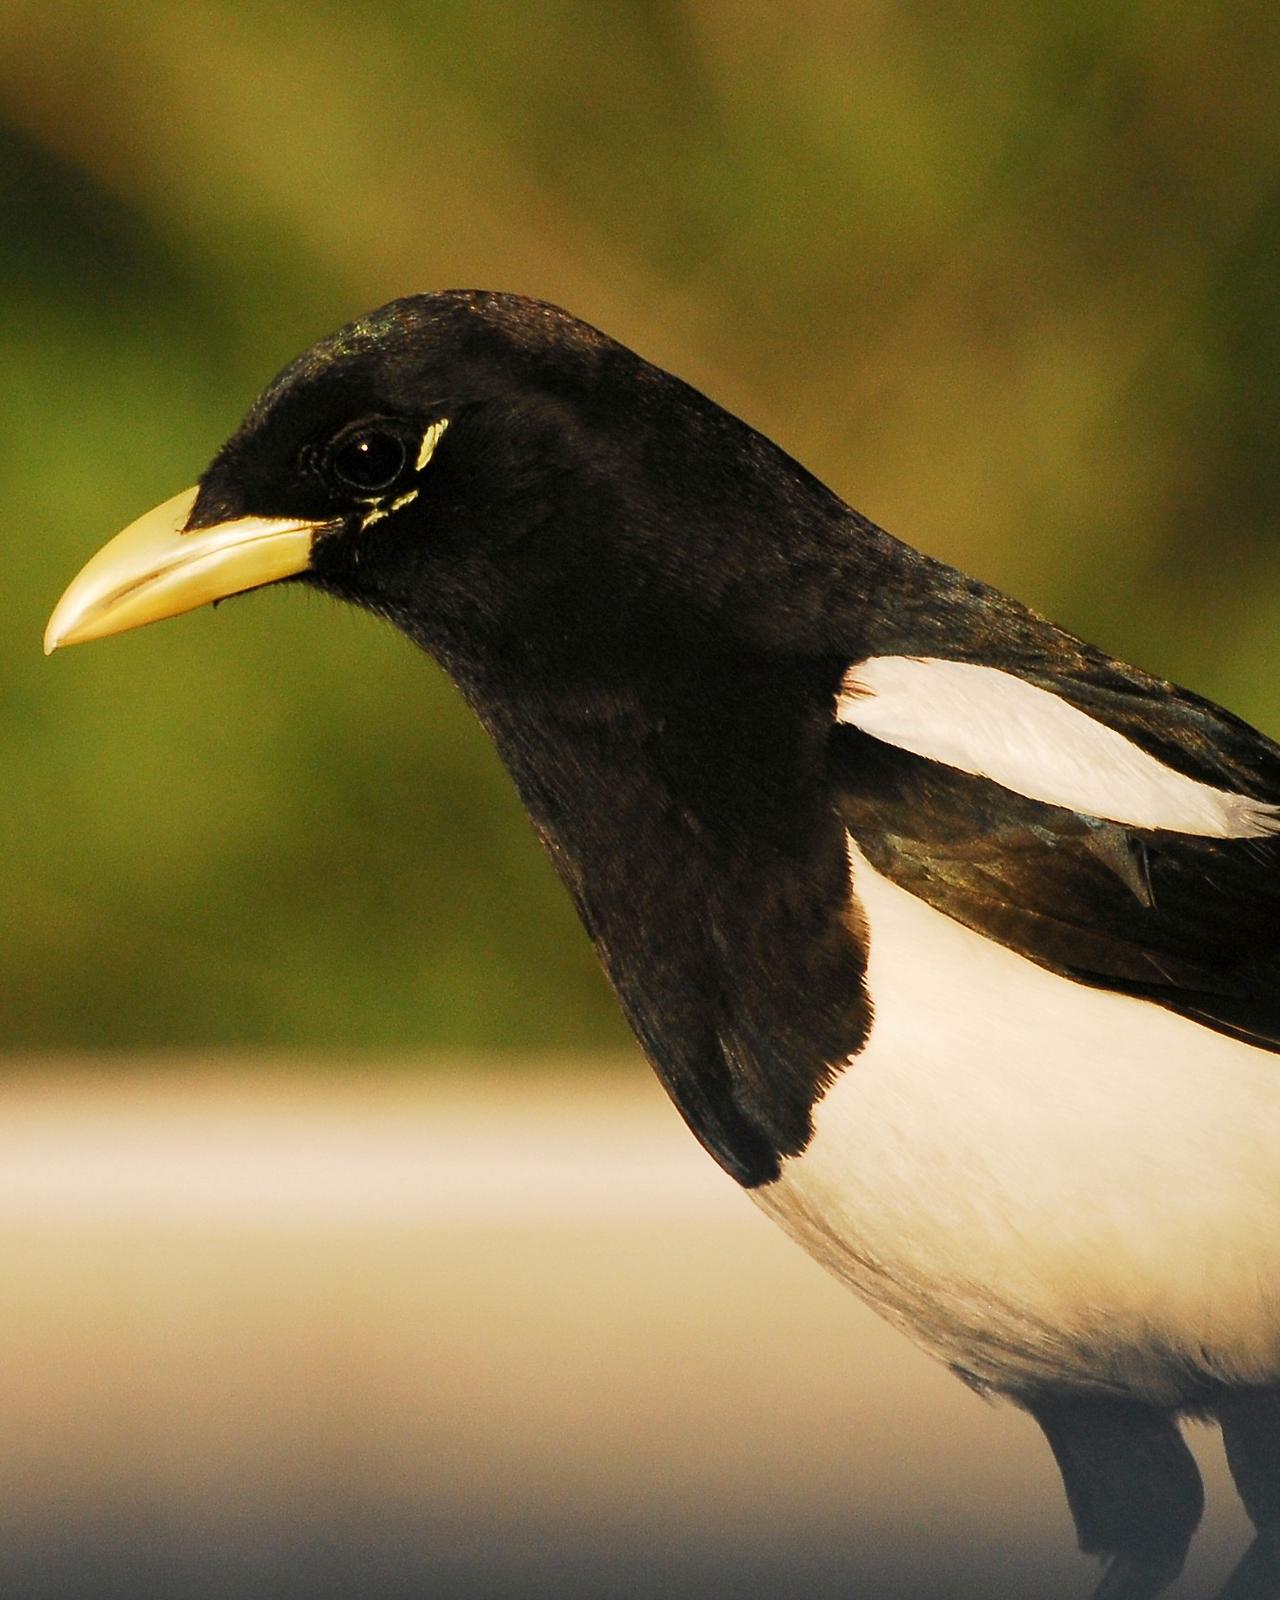 Yellow-billed Magpie Photo by David Hollie